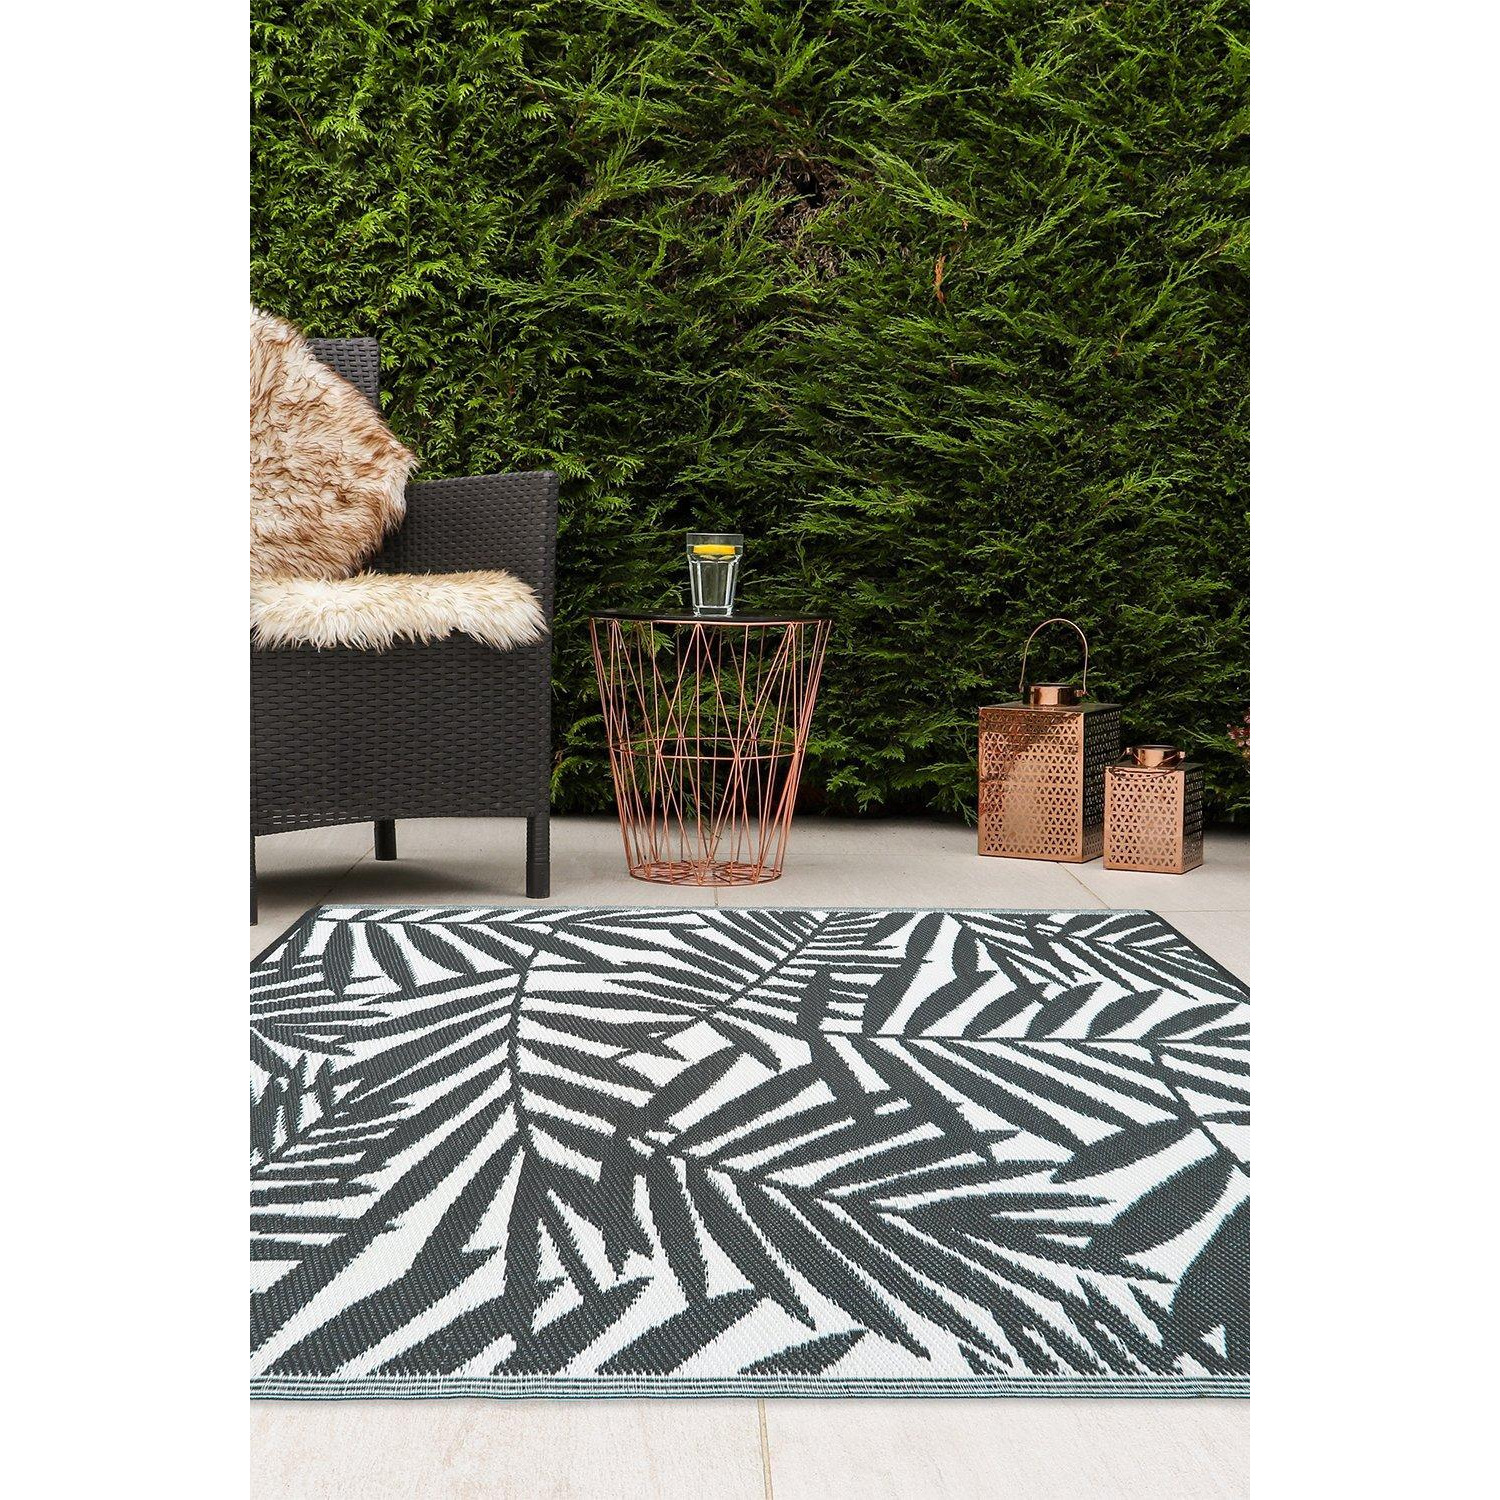 Lightweight Reversible Plastic Woven Outdoor Rug 133x190cm Leaves - image 1